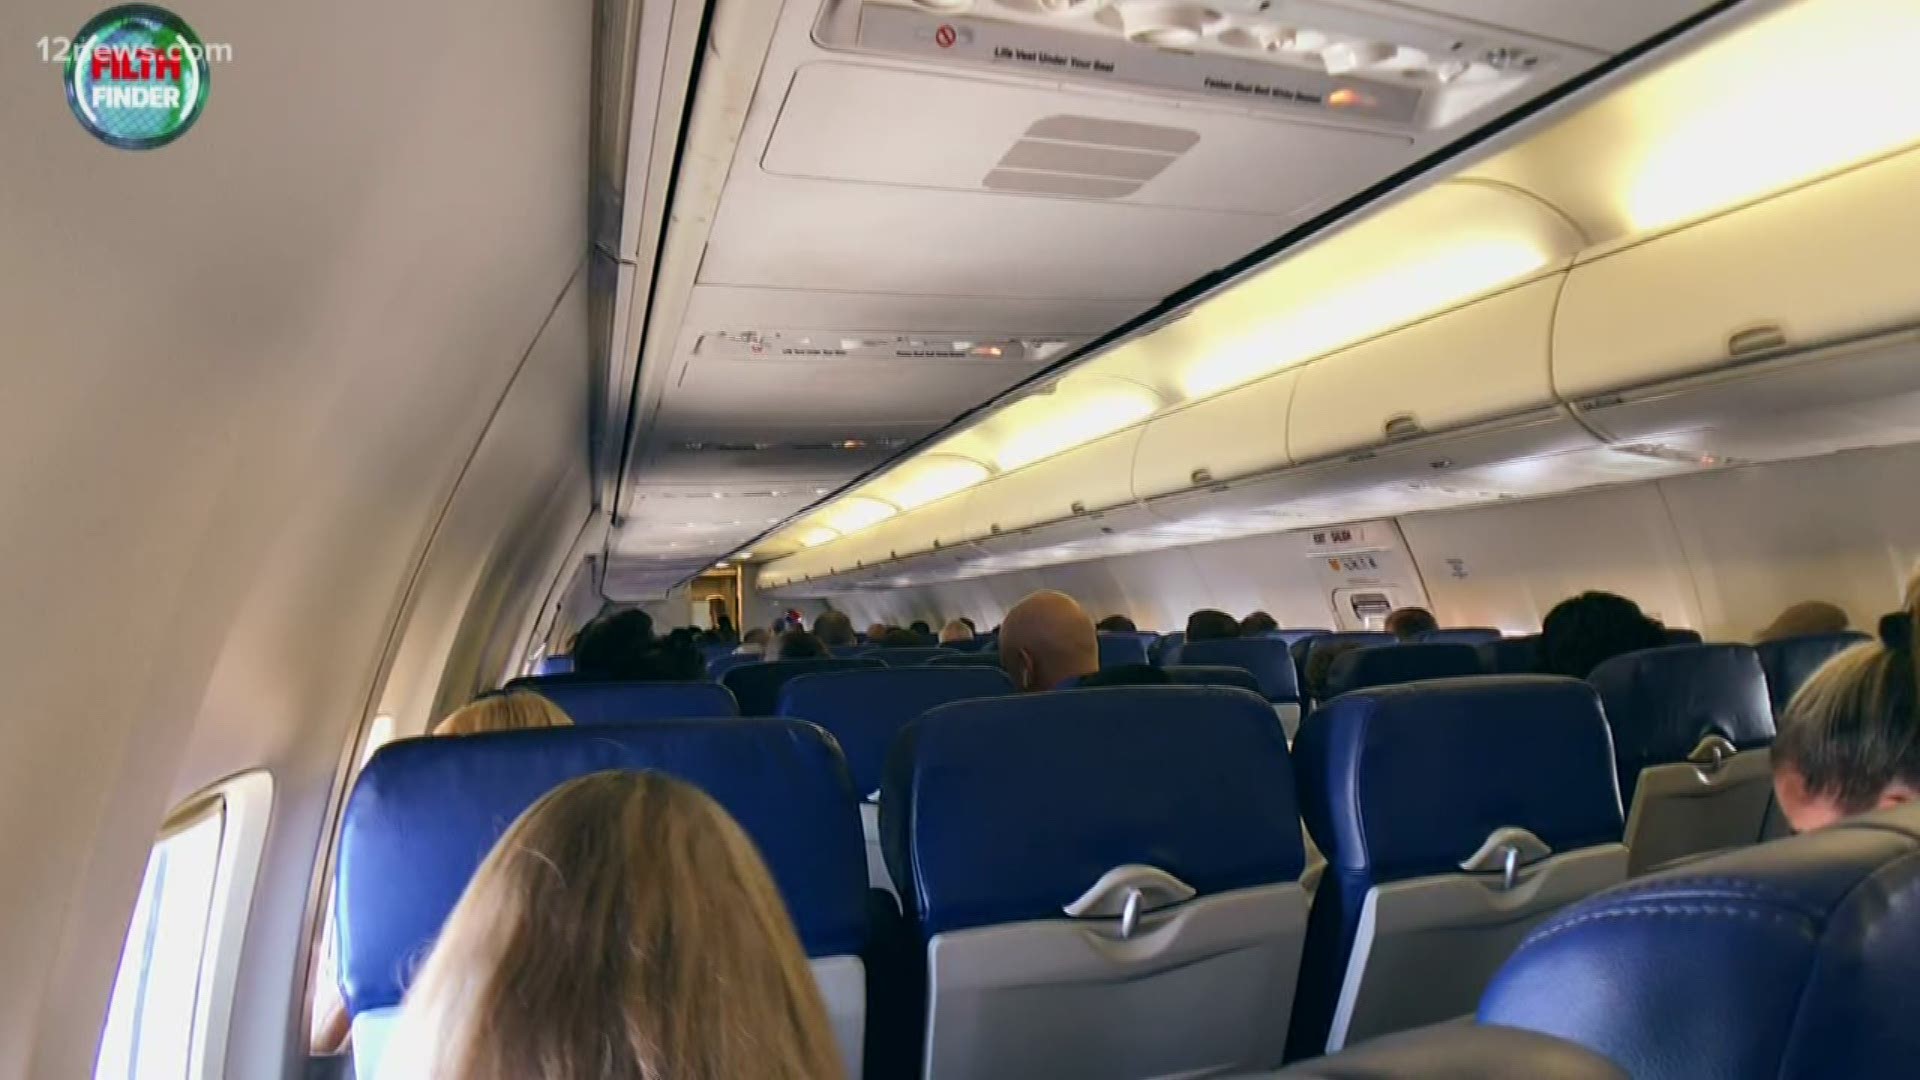 With nearly 2.8 million passengers flying in and out of U.S. airports every day, airplanes are a breeding ground for germs including bacteria and viruses.